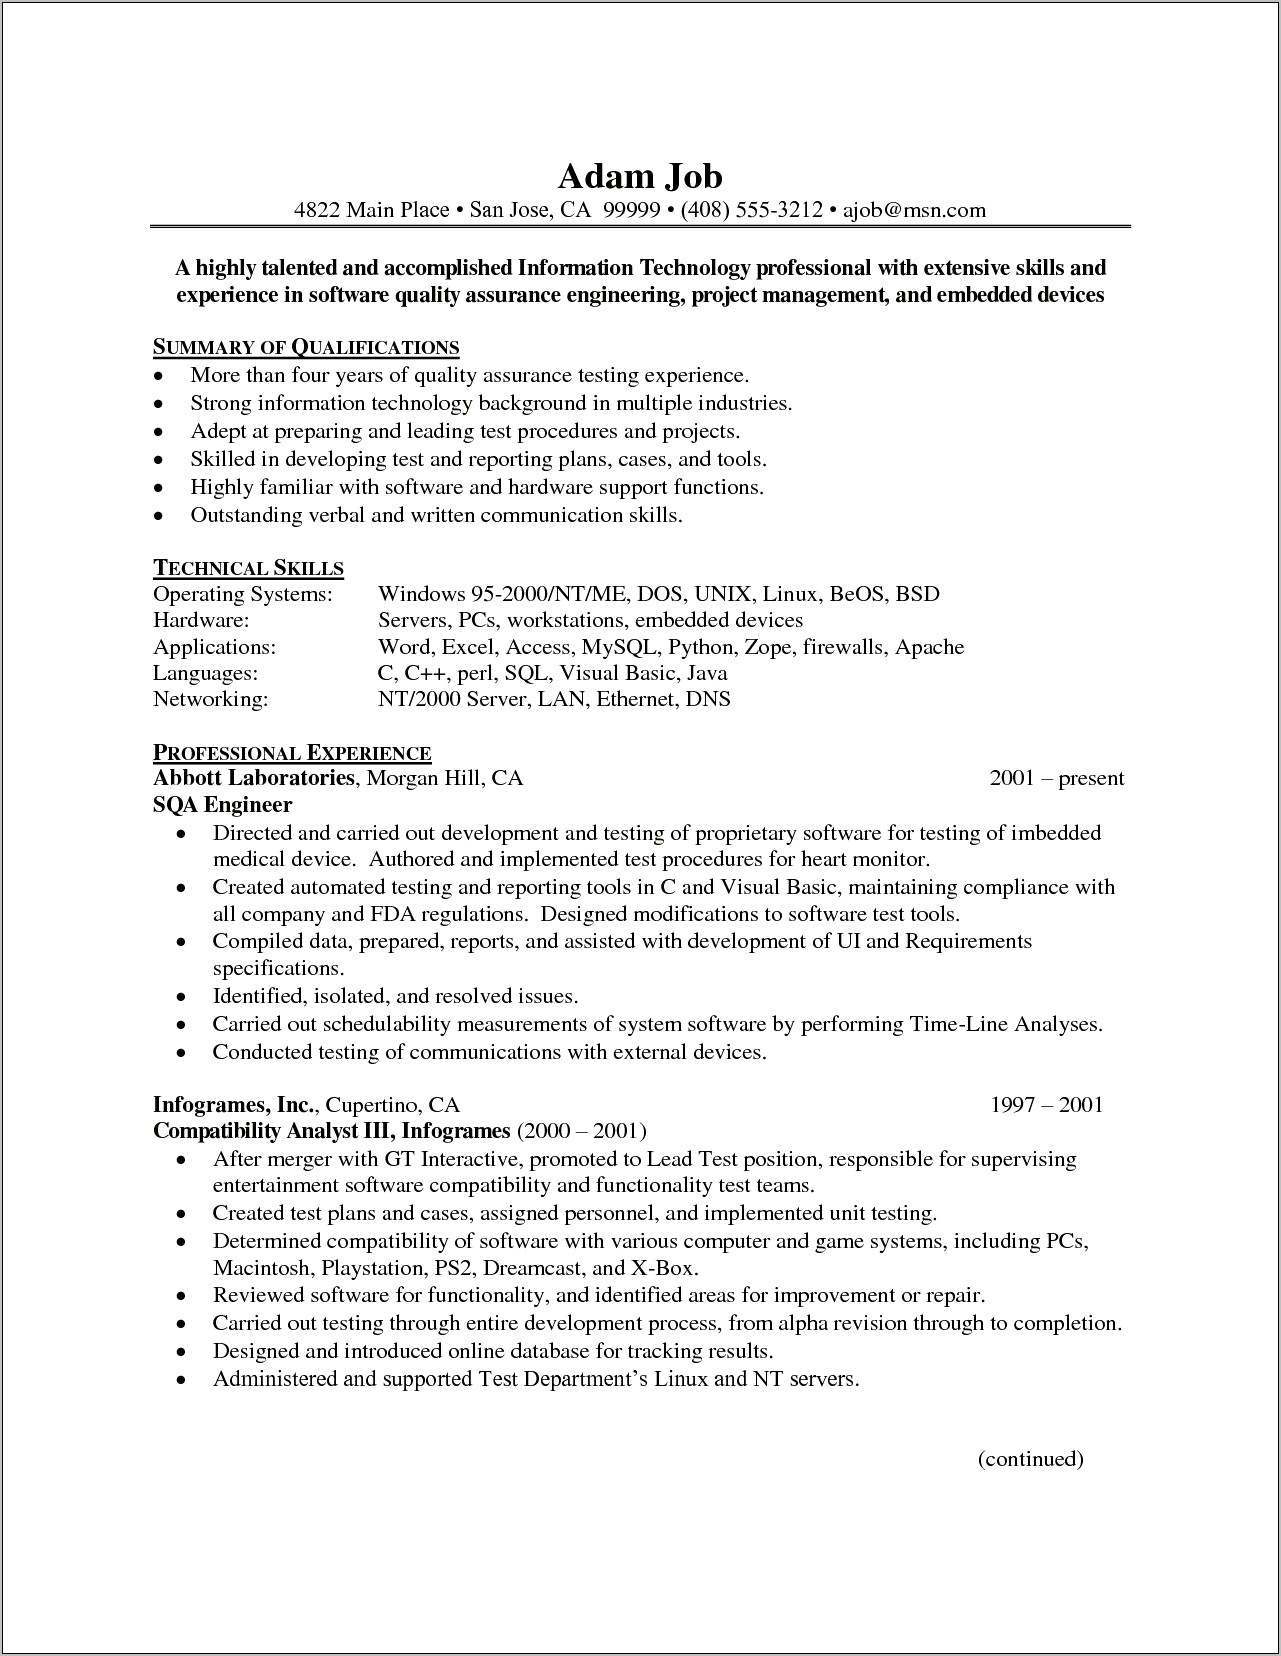 Best Resume For Experienced Quality Engineers